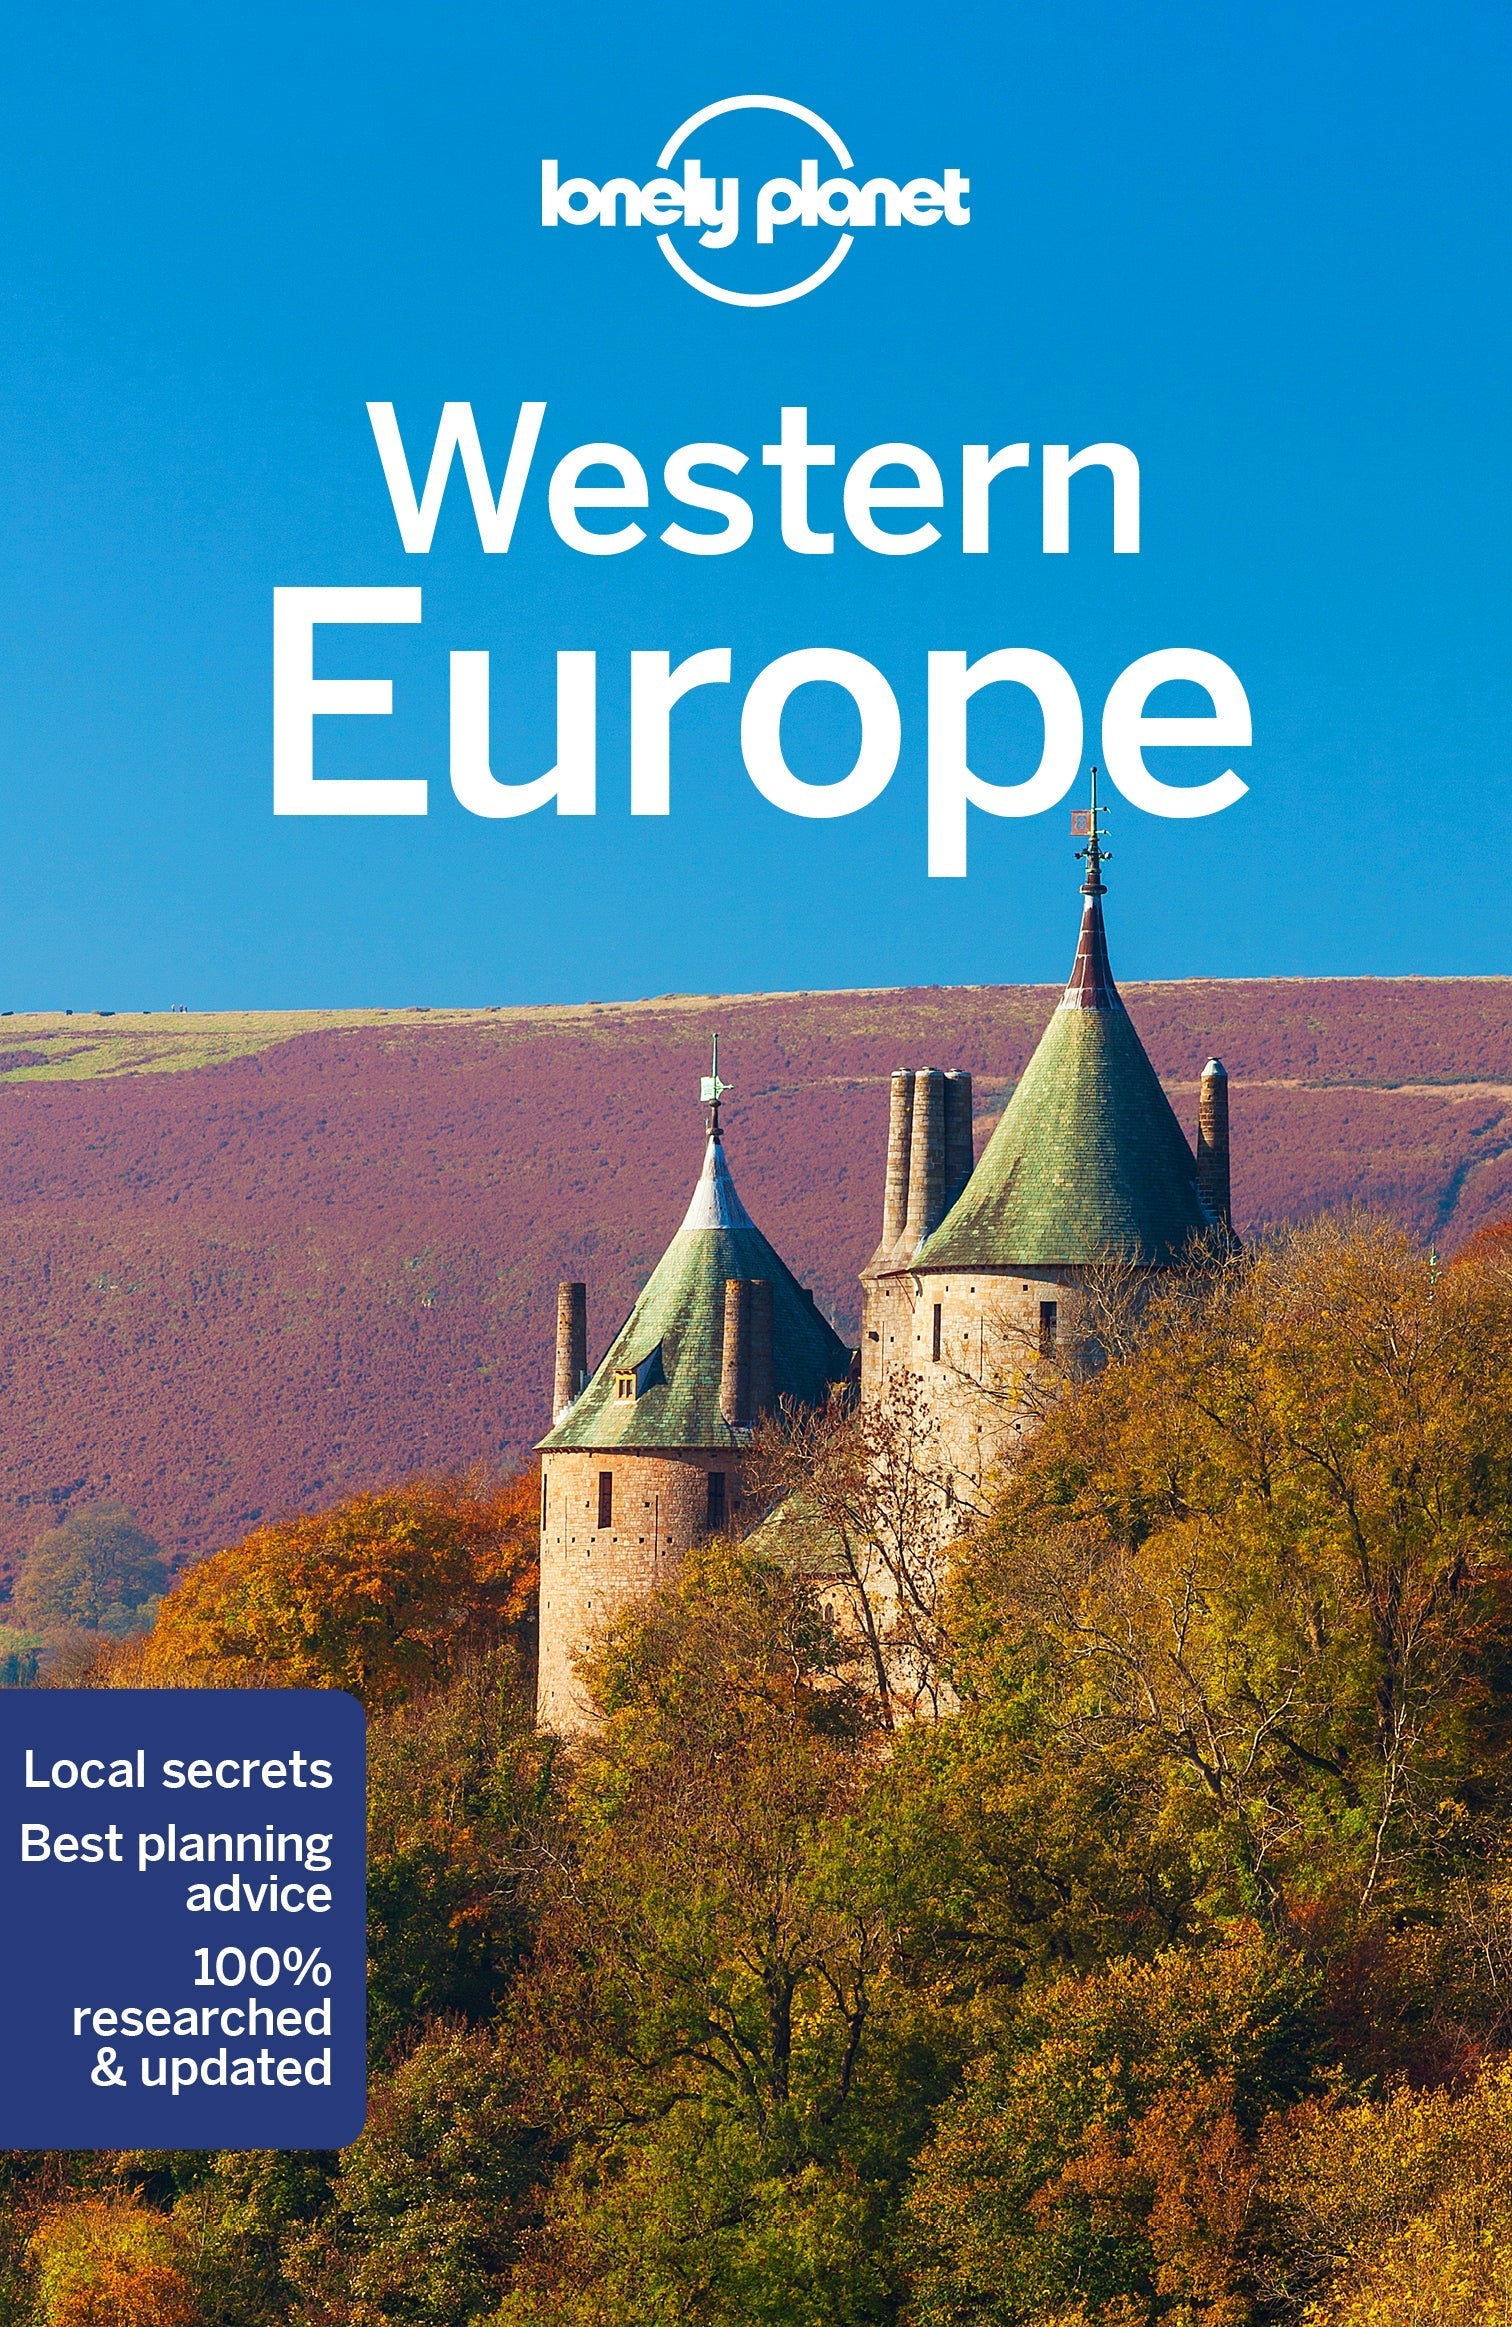 Poland Travel Guide 2020 - Lonely Planet Online Shop